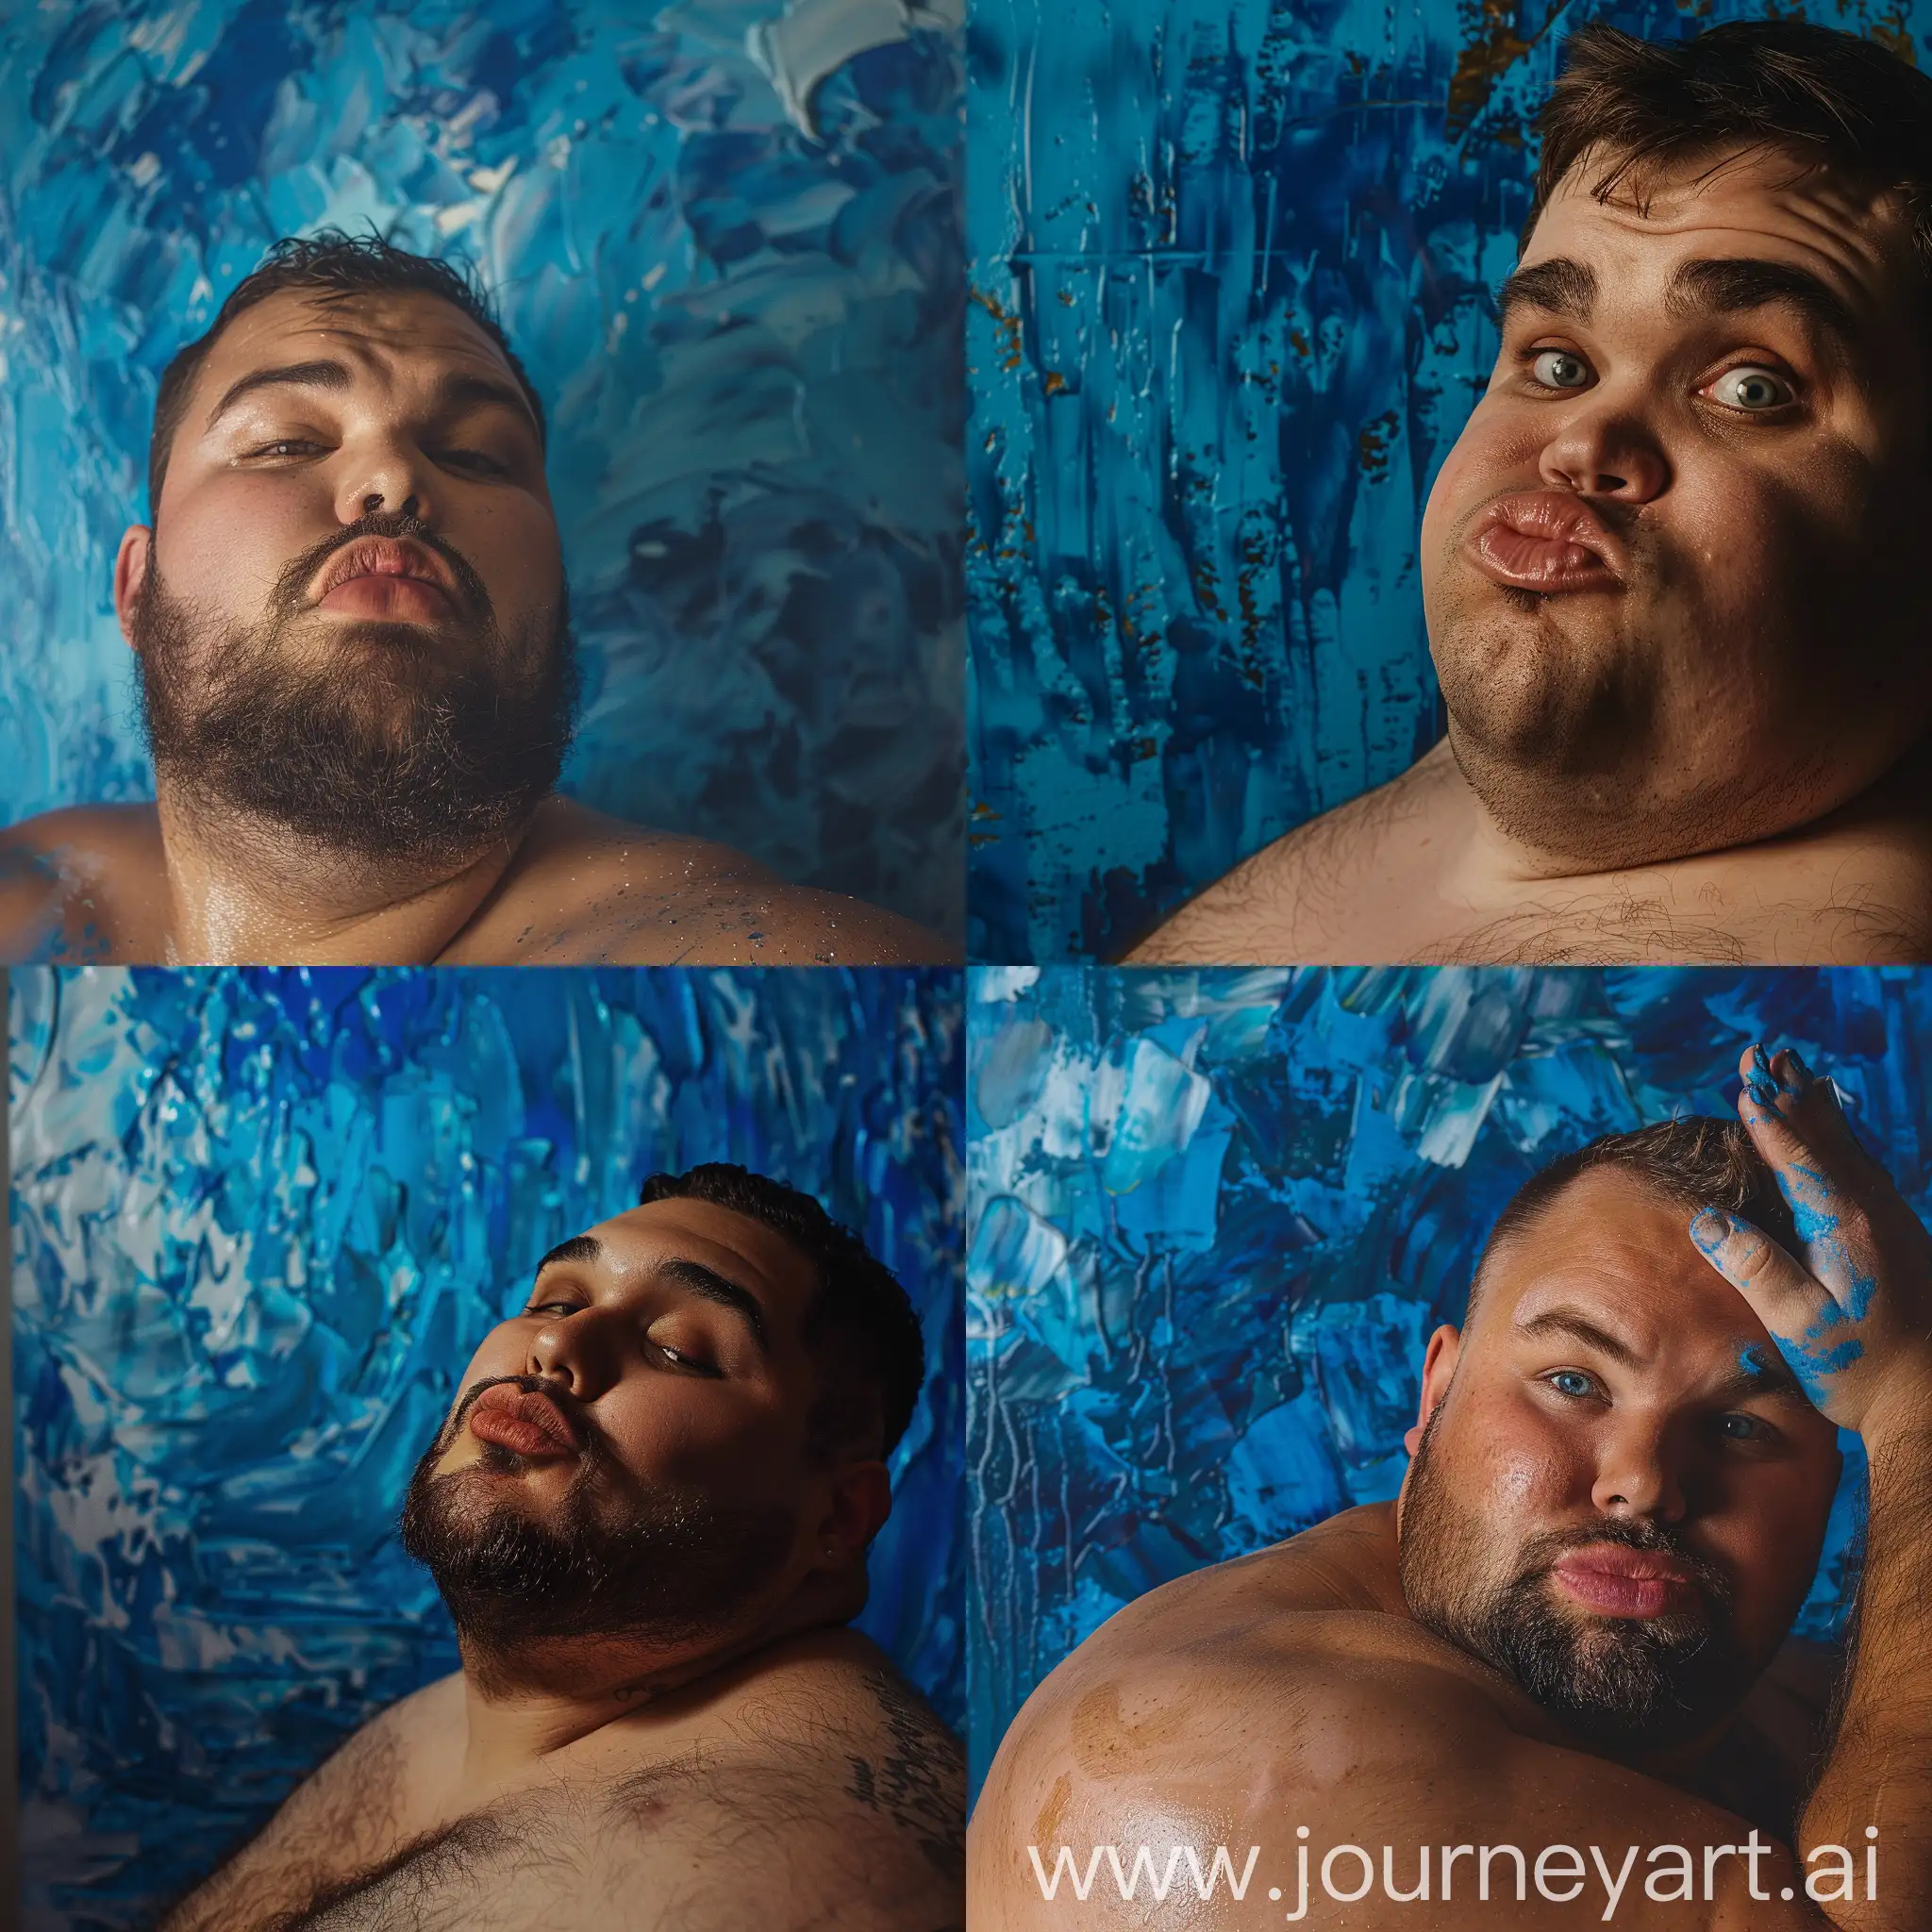 Closeup-Portrait-of-Charming-Plussize-Man-with-Cupids-Bow-Lips-Against-Blue-Painting